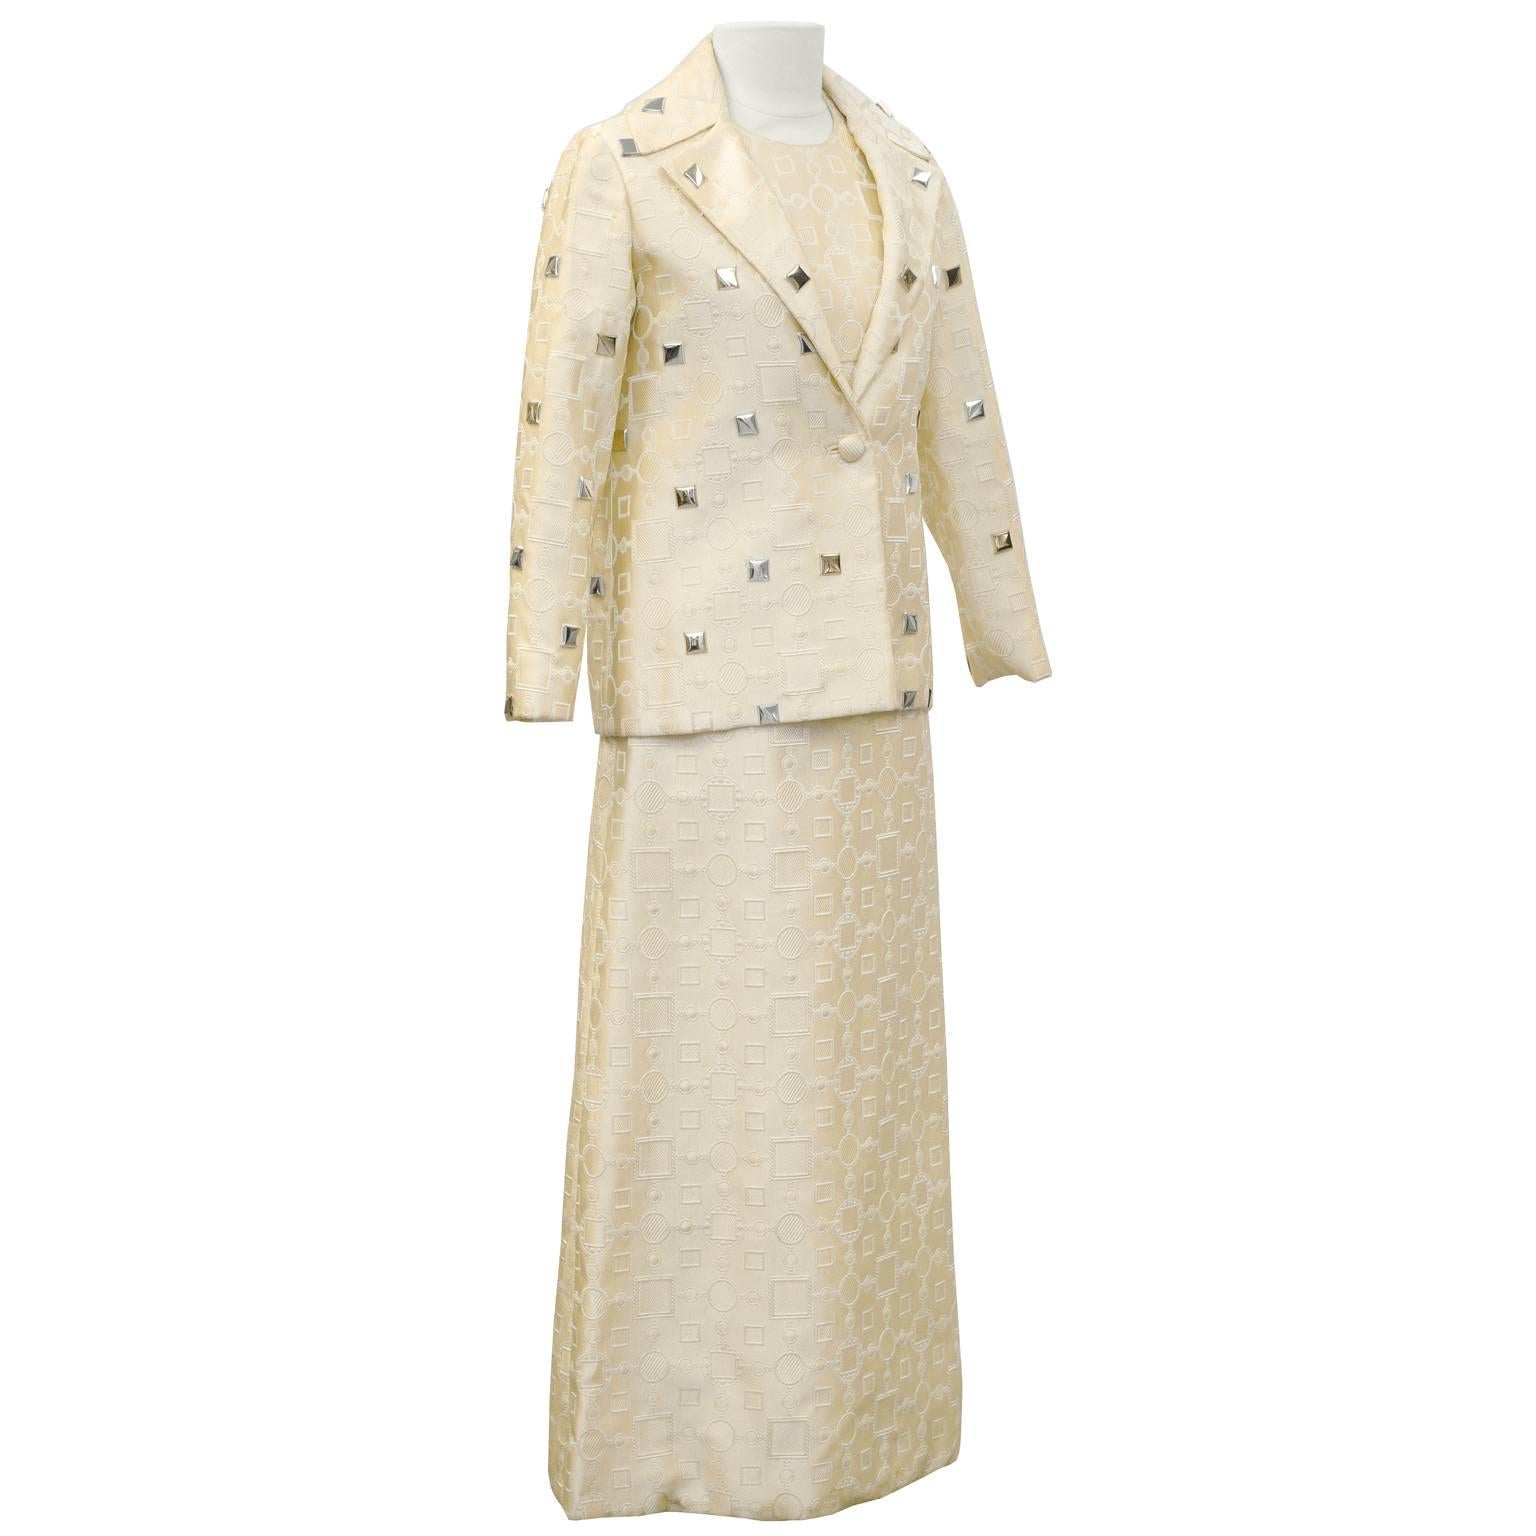 Anonymous cream brocade fabric featuring mod geometric print of circles and squares. High neck empire waist A-line sleeveless gown. Finished with a small notched lapel blazer of the same fabric. Single button closure decorated with gold and silver